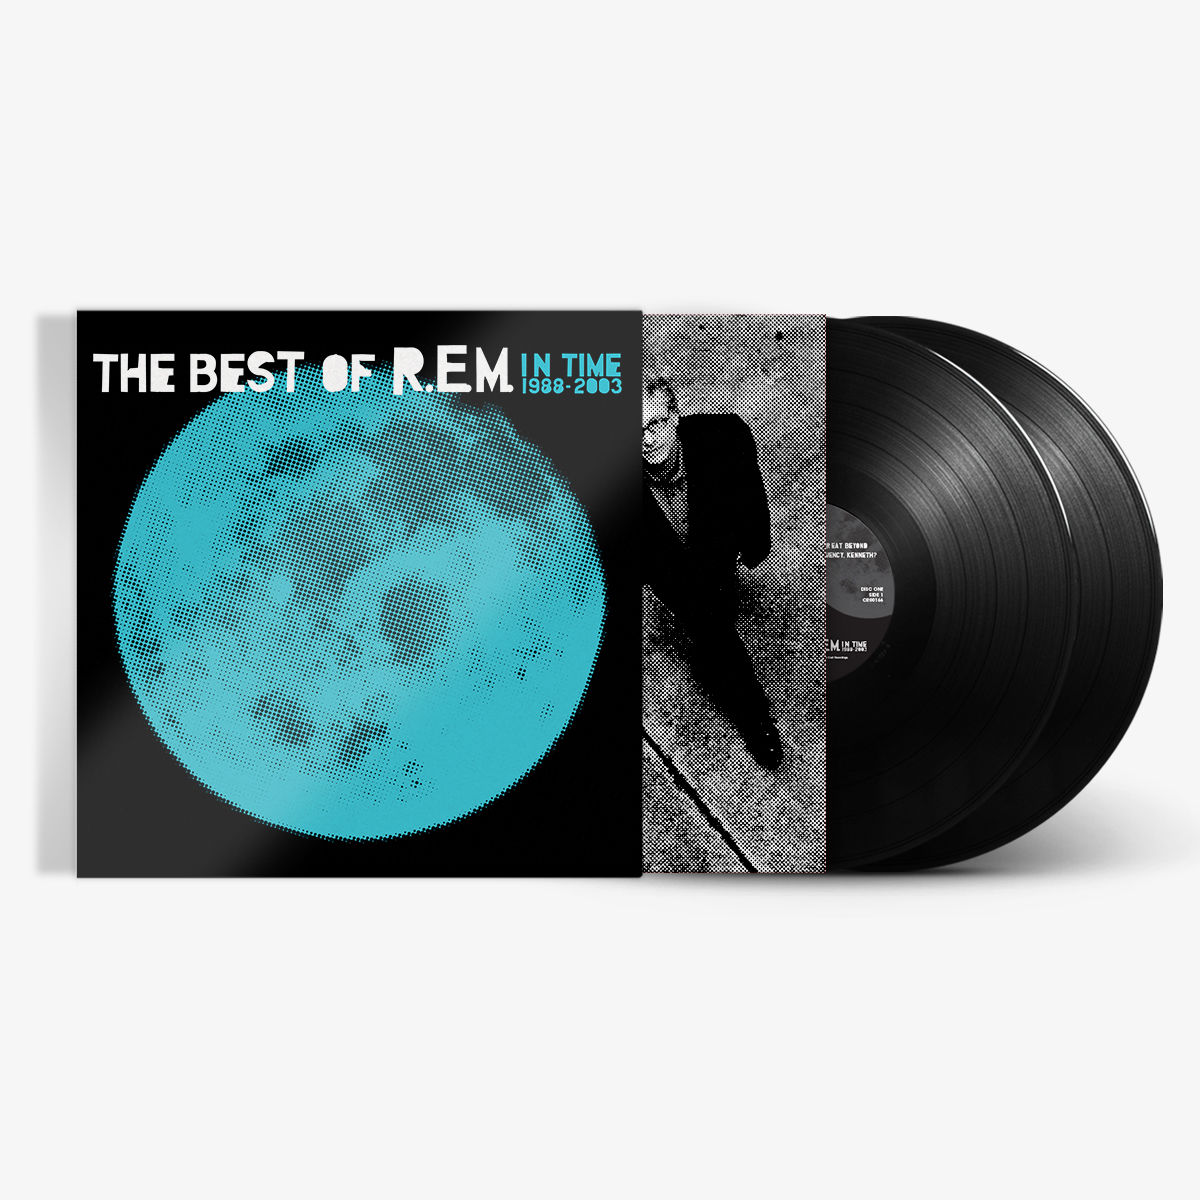 R.E.M. - In Time - The Best Of R.E.M. 1988-2003: Vinyl 2LP